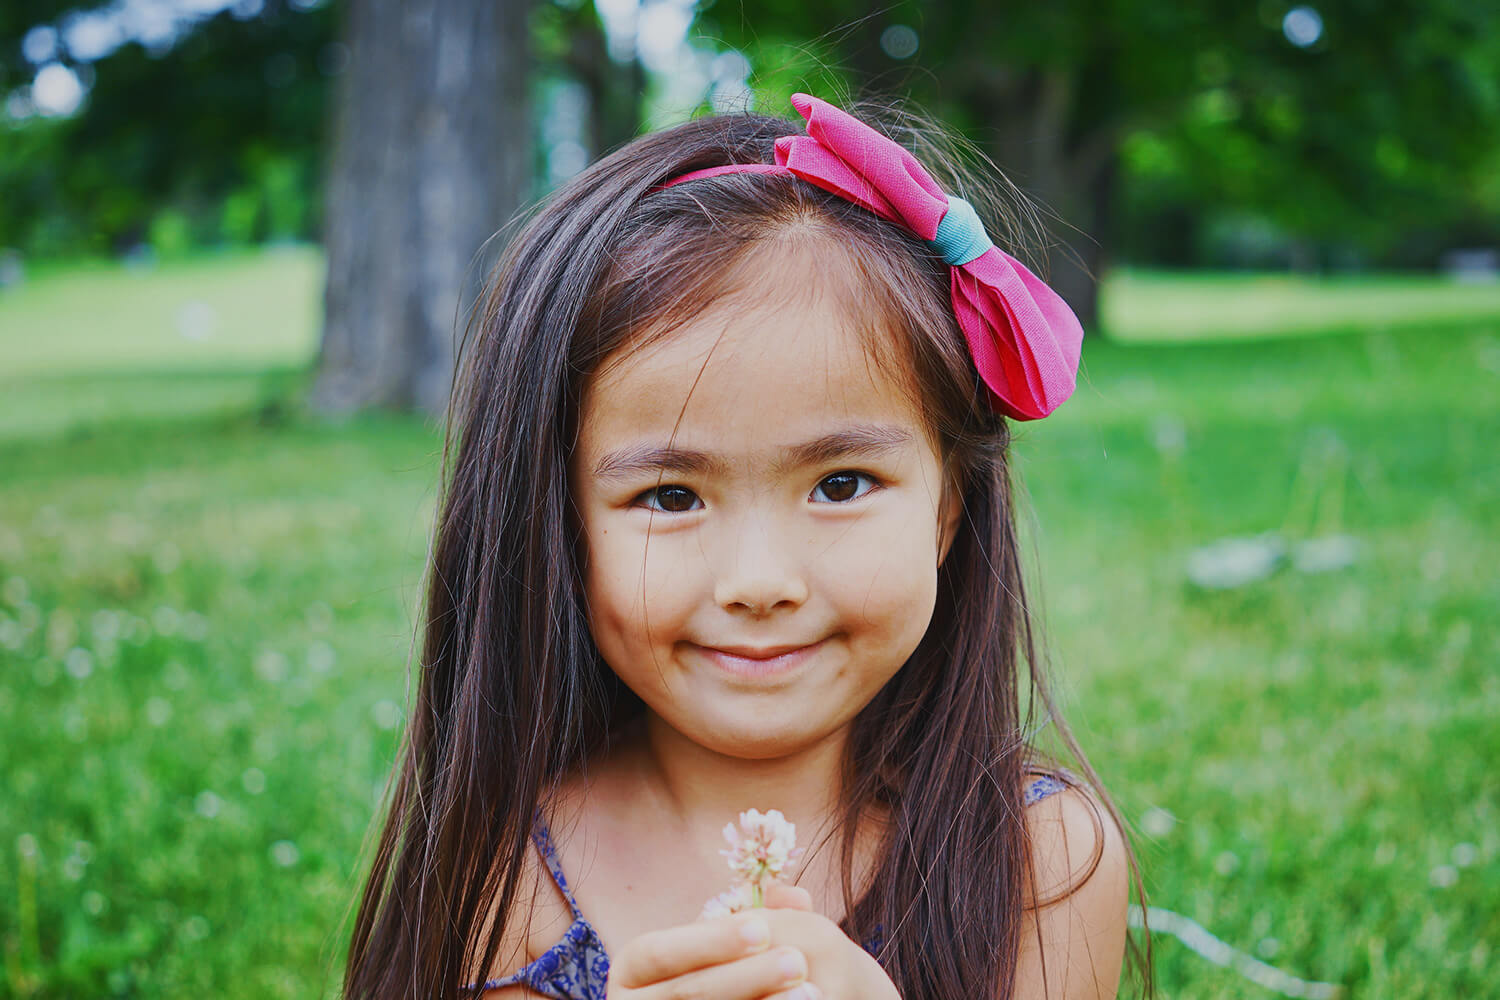 Young girl holding small flower